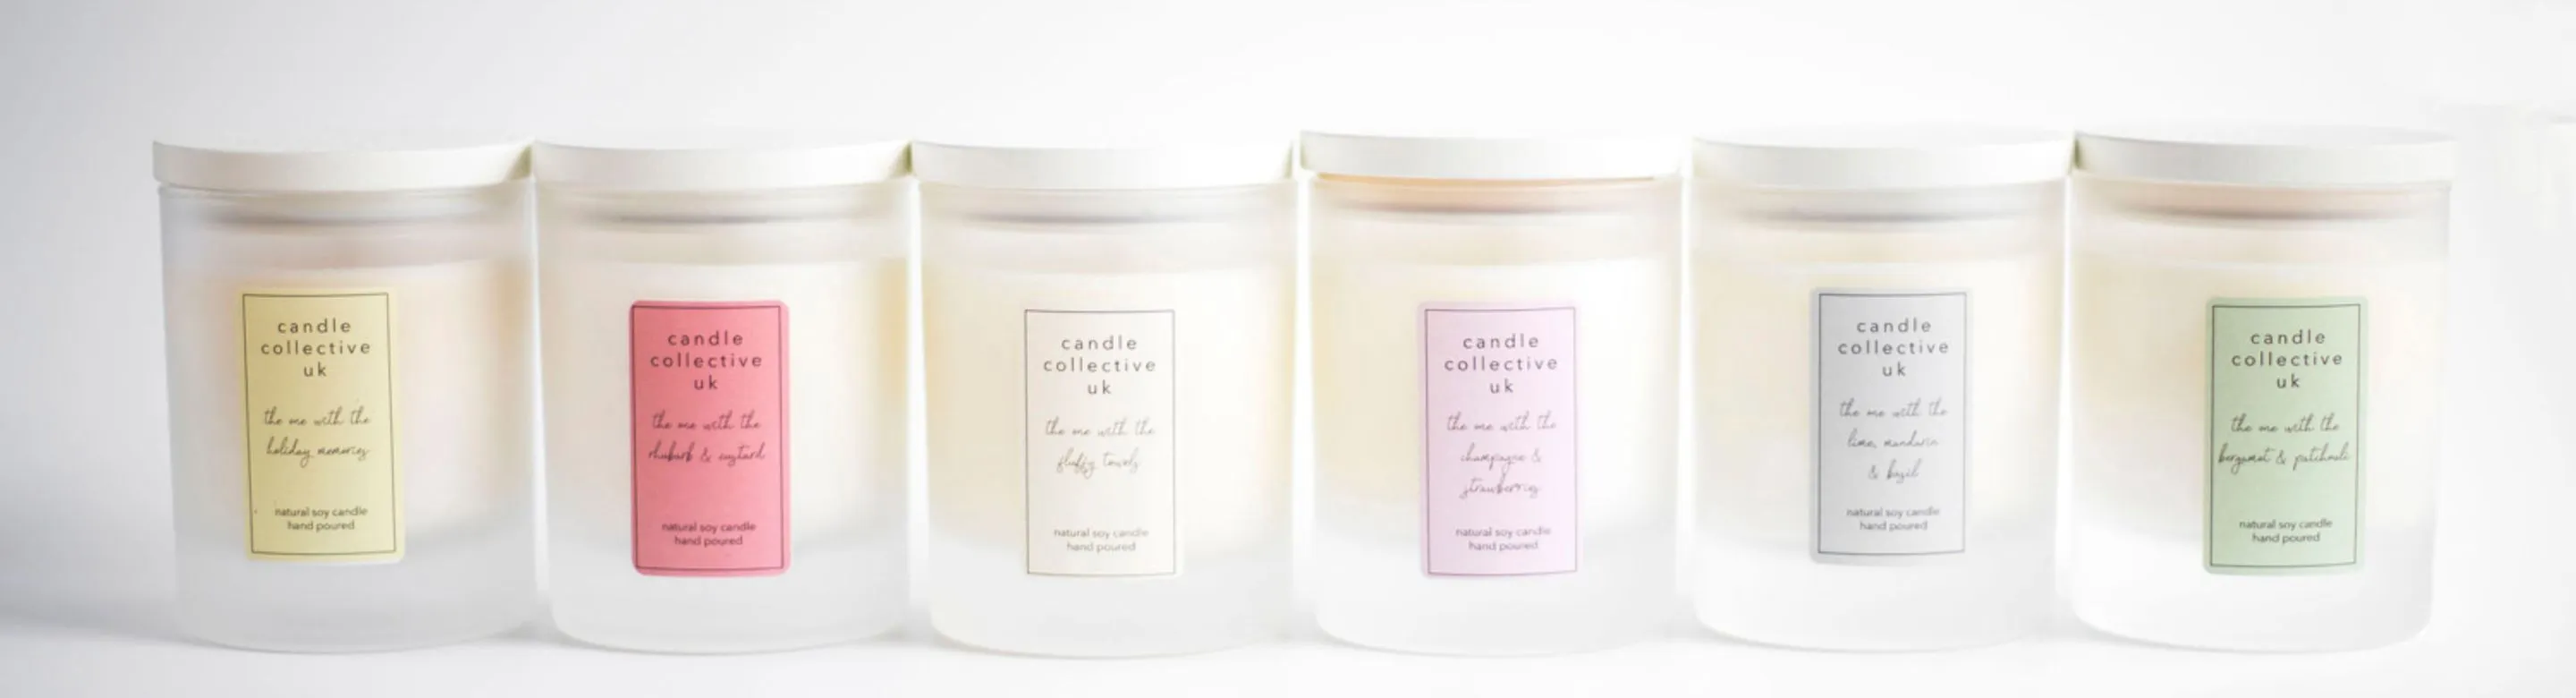 Candle Collective UK